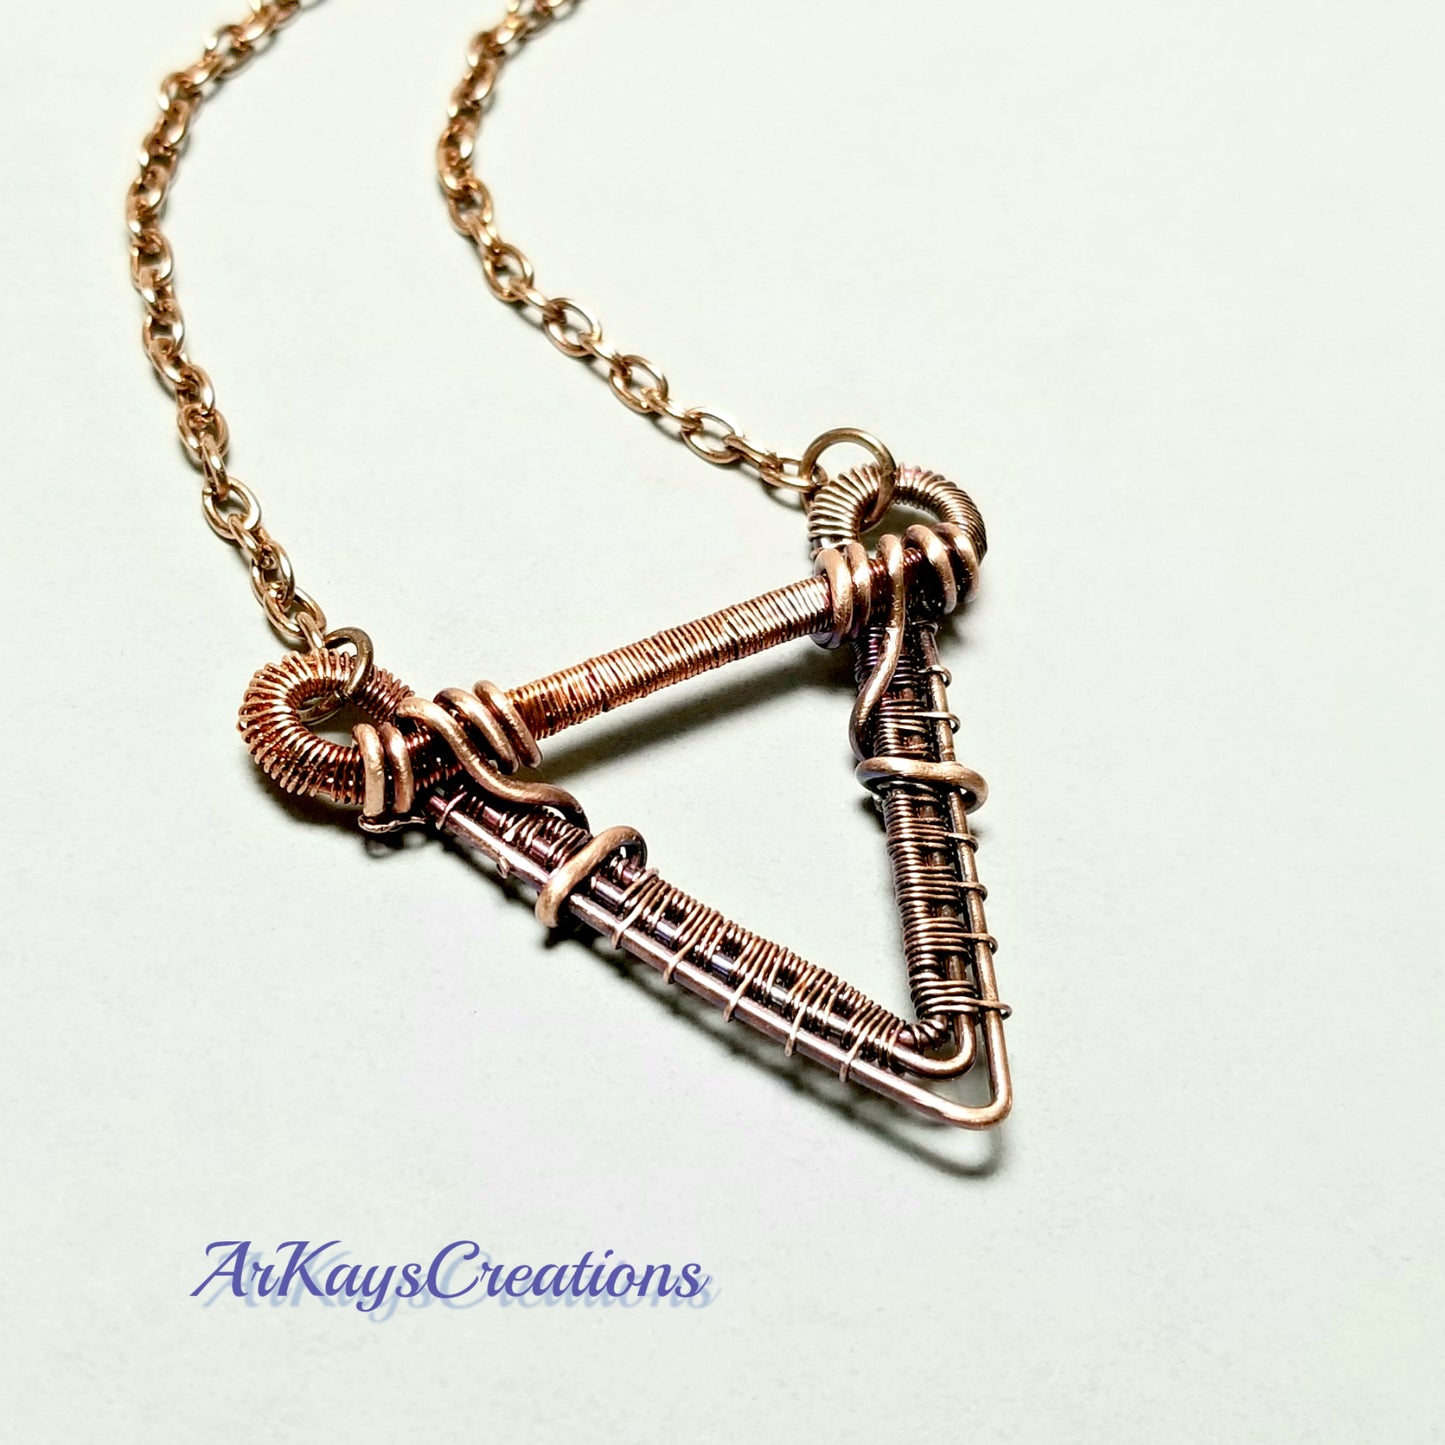 Copper Chainmail Persephone Square Knot Pendant Adjustable Necklace